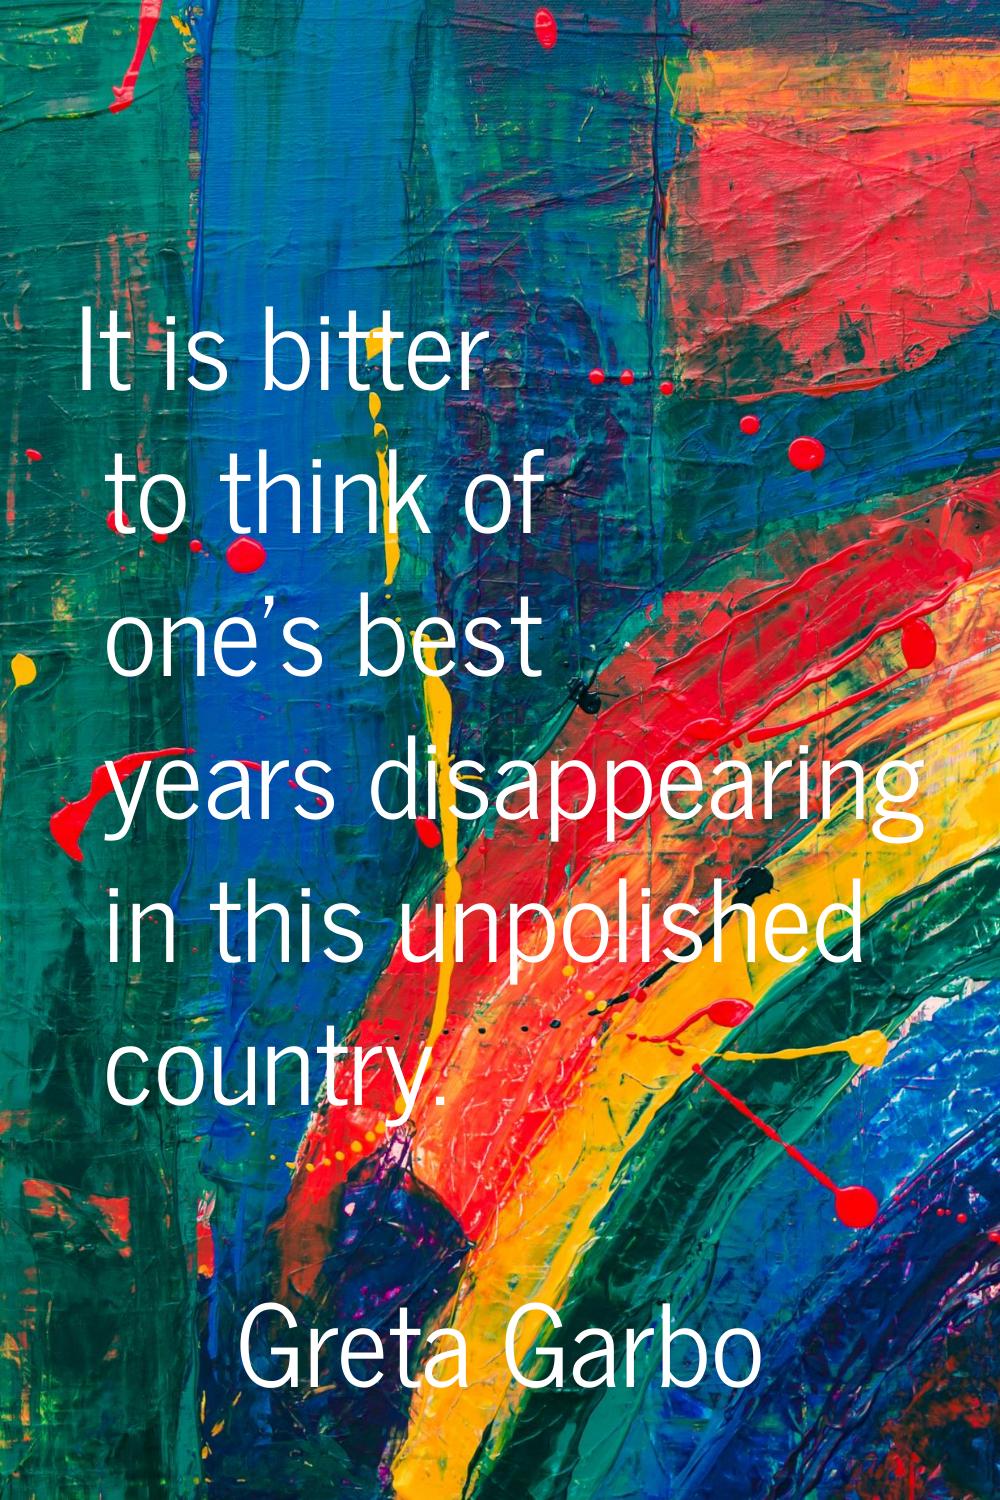 It is bitter to think of one's best years disappearing in this unpolished country.